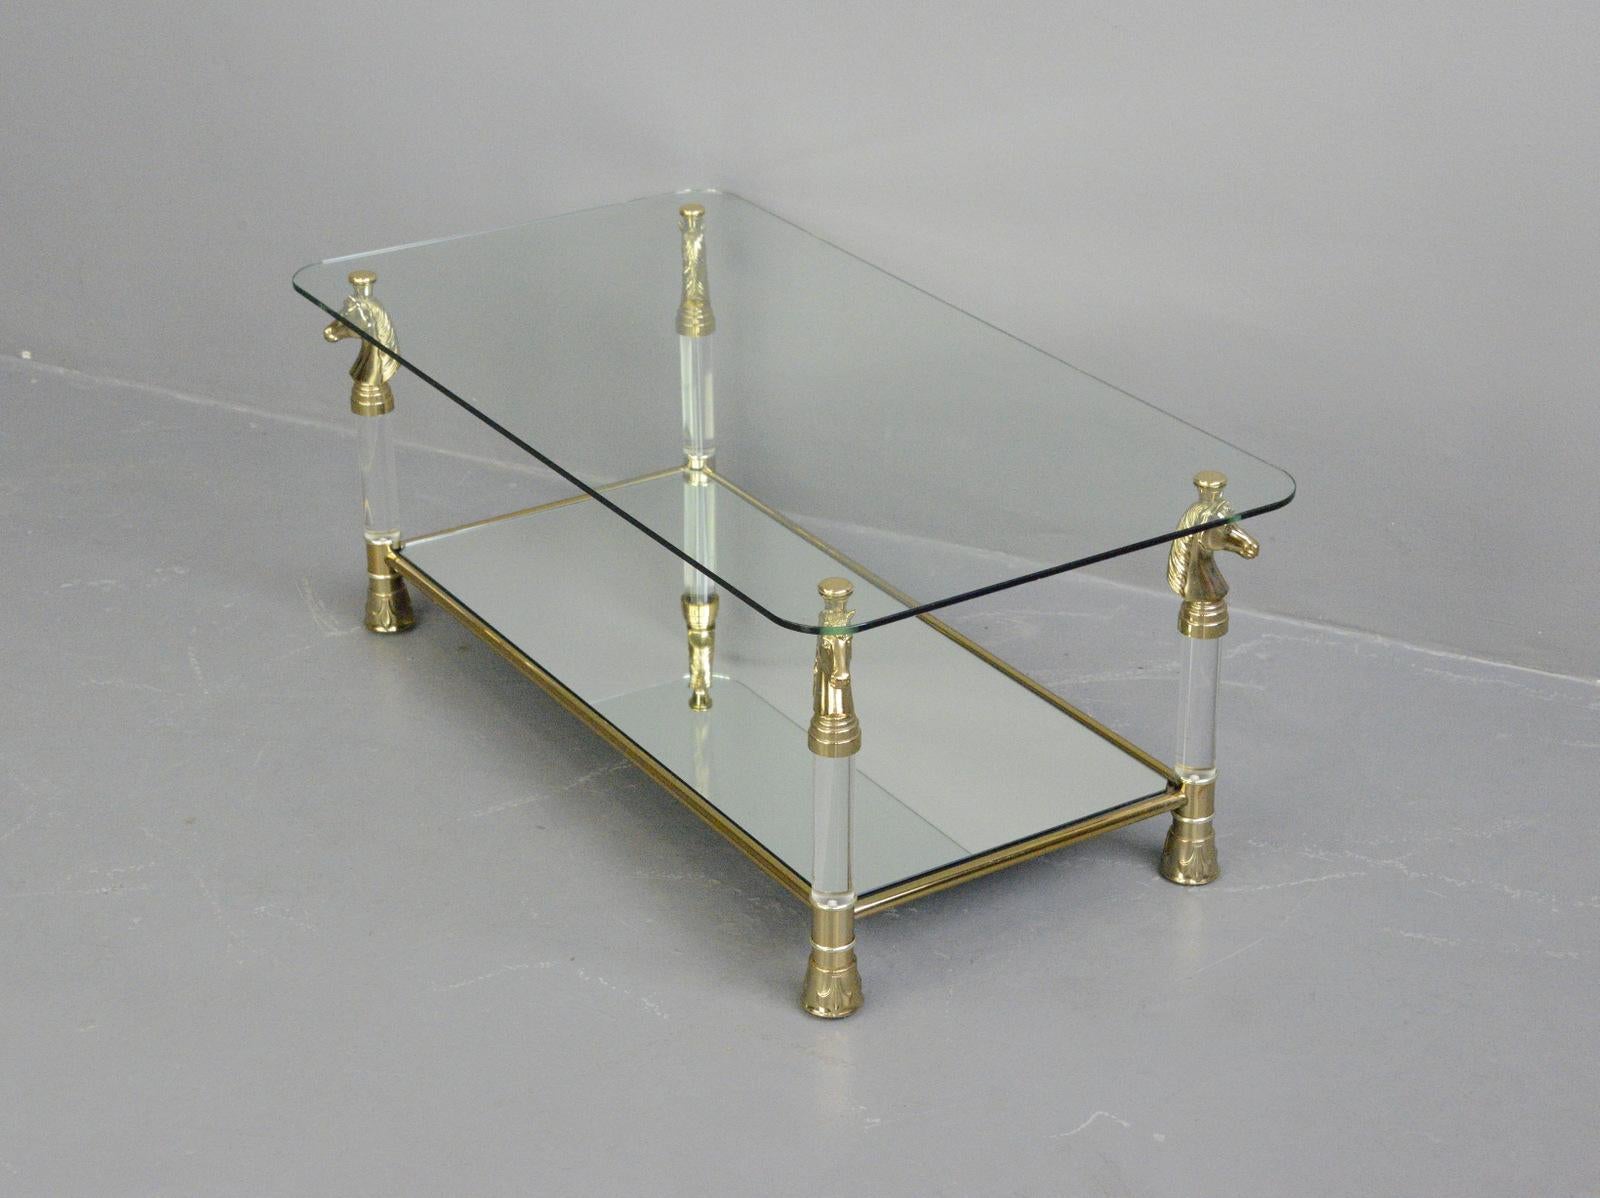 Hollywood Regency coffee by Maison Charles Paris table, Circa 1970s

- Lucite legs with brass horses
- Brass feet with fleur de lis detailing
- Toughened mirror glass shelf
- Toughened glass top
- French ~ 1970s
- Measures: 105cm long x 55cm